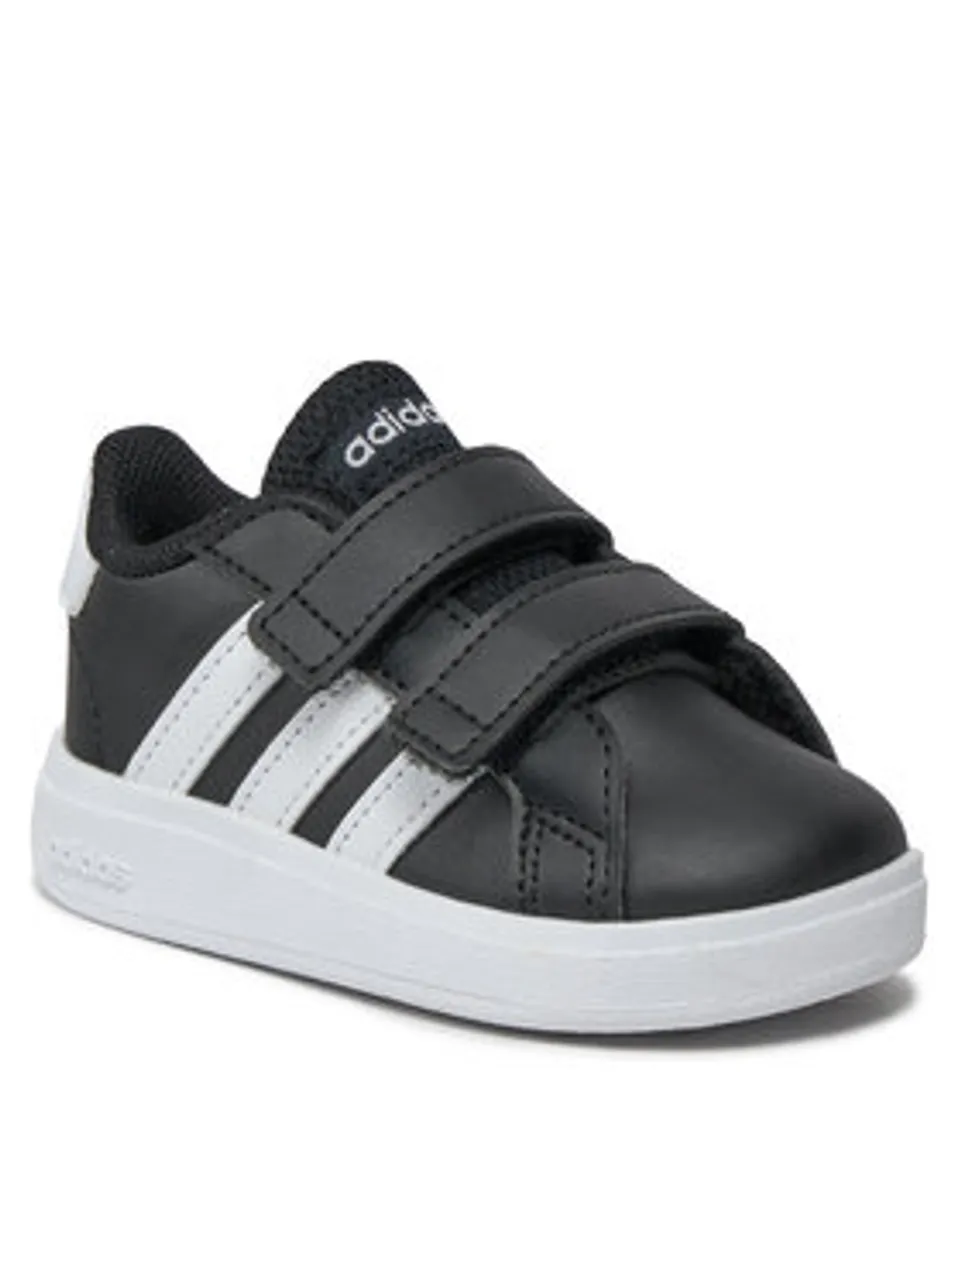 adidas Sneakers Grand Court Lifestyle Hook and Loop Shoes GW6523 Schwarz